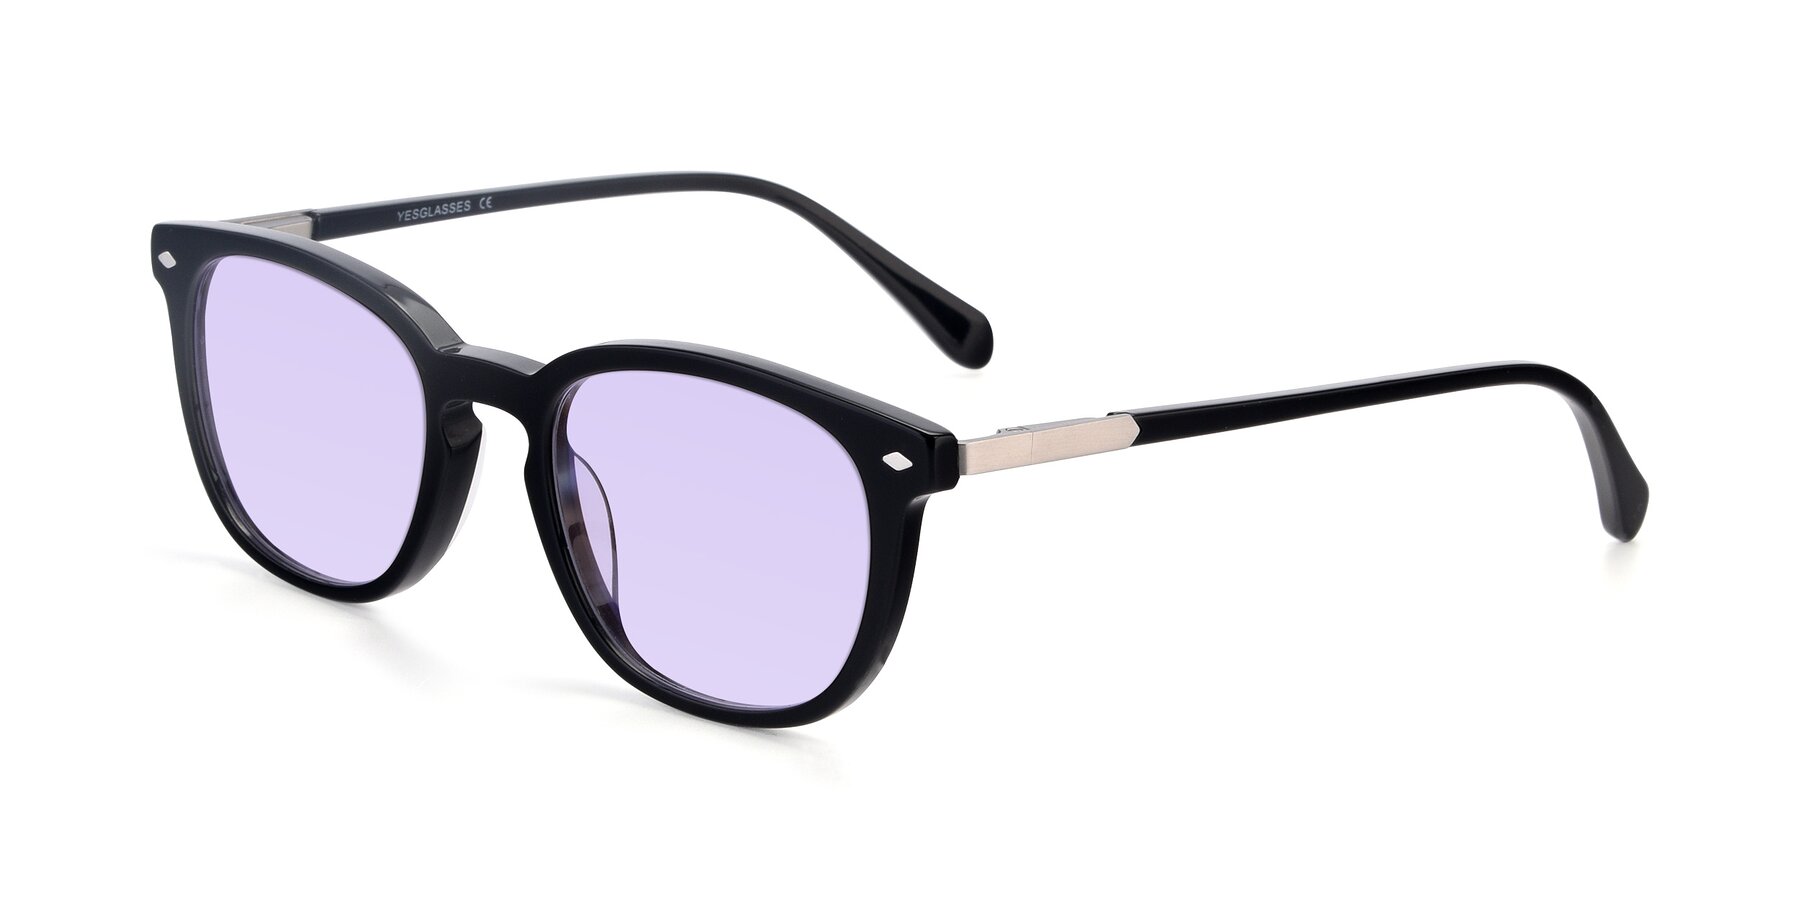 Angle of 17578 in Black with Light Purple Tinted Lenses